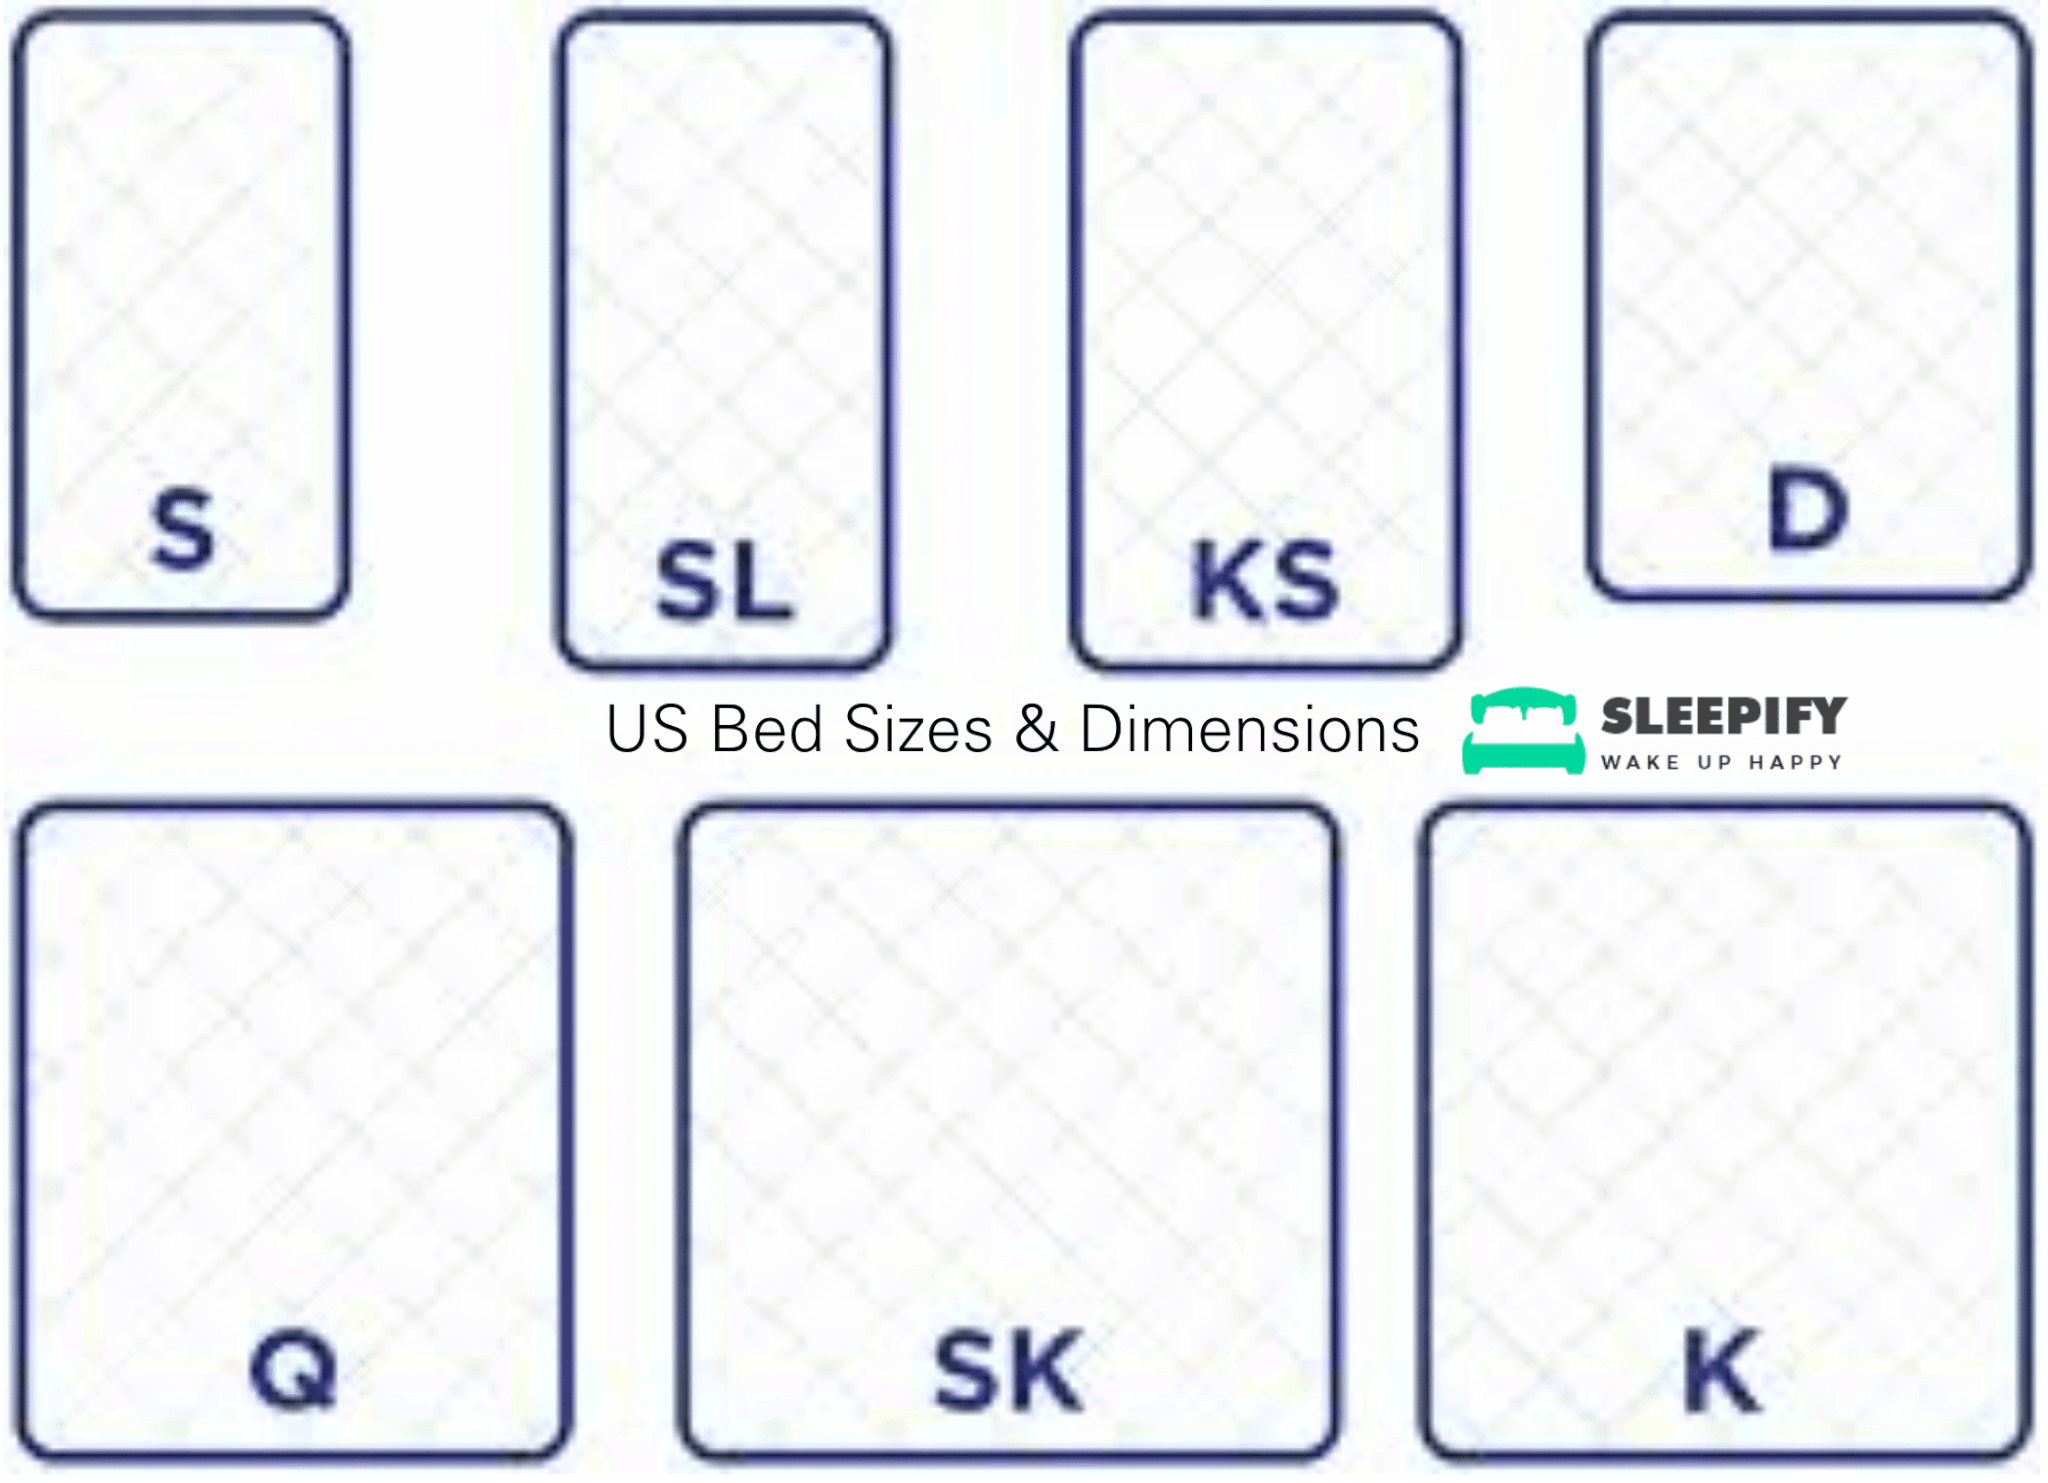 US-Bed-Sizes-Dimensions-Resized-1